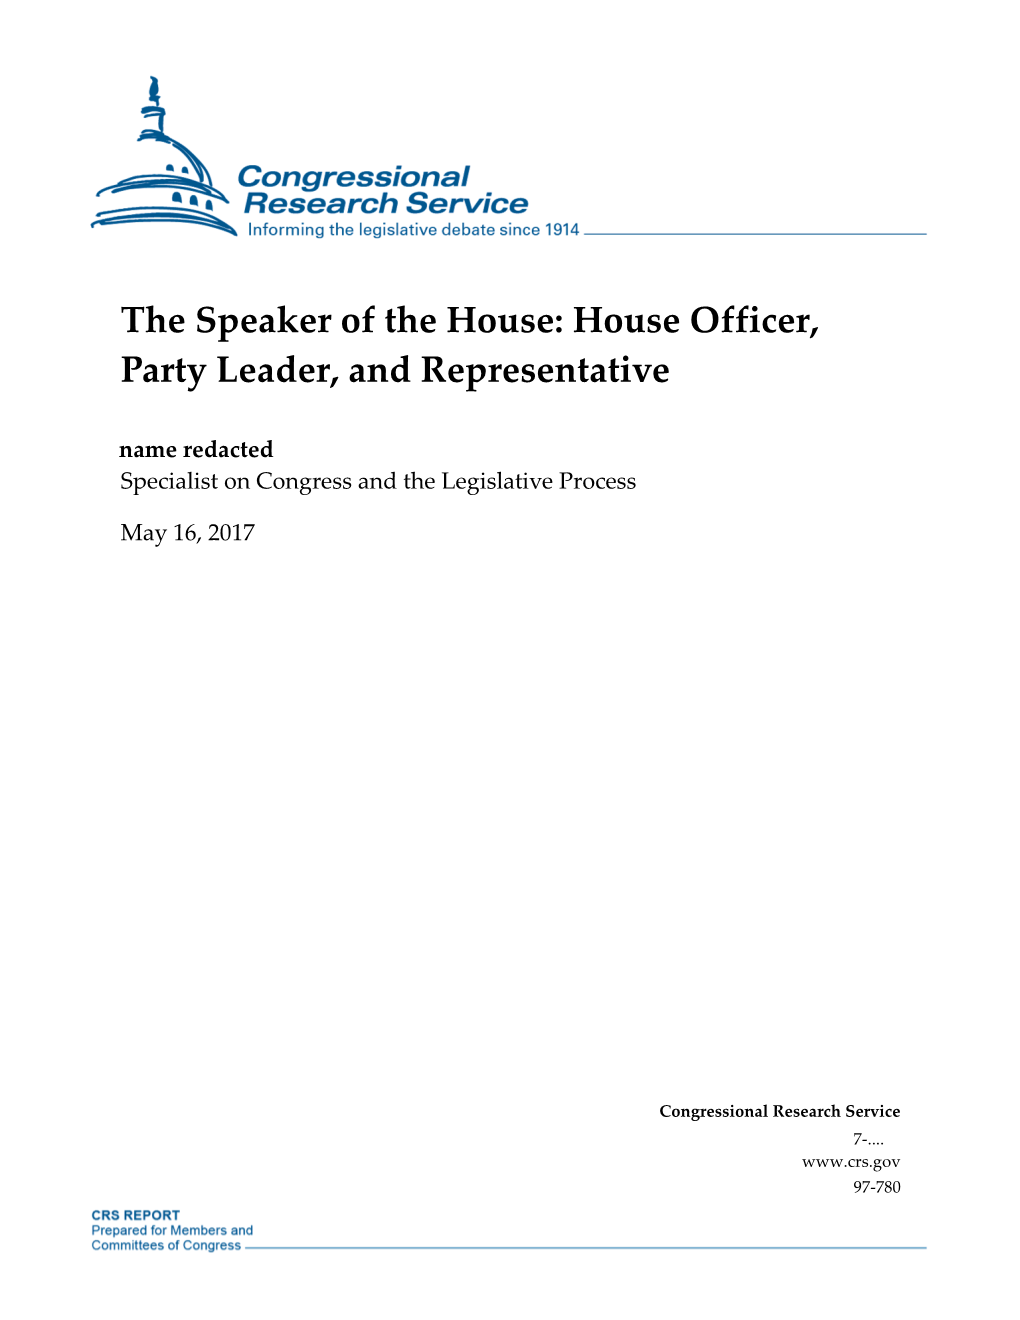 The Speaker of the House: House Officer, Party Leader, and Representative Name Redacted Specialist on Congress and the Legislative Process